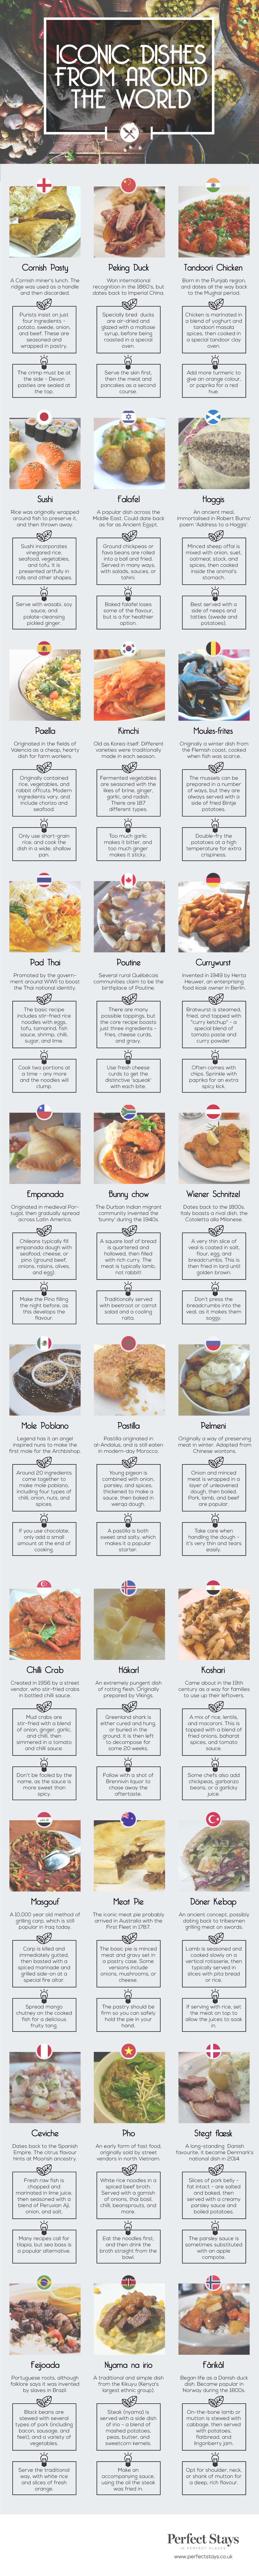 Iconic-Dishes-from-Around-the-World